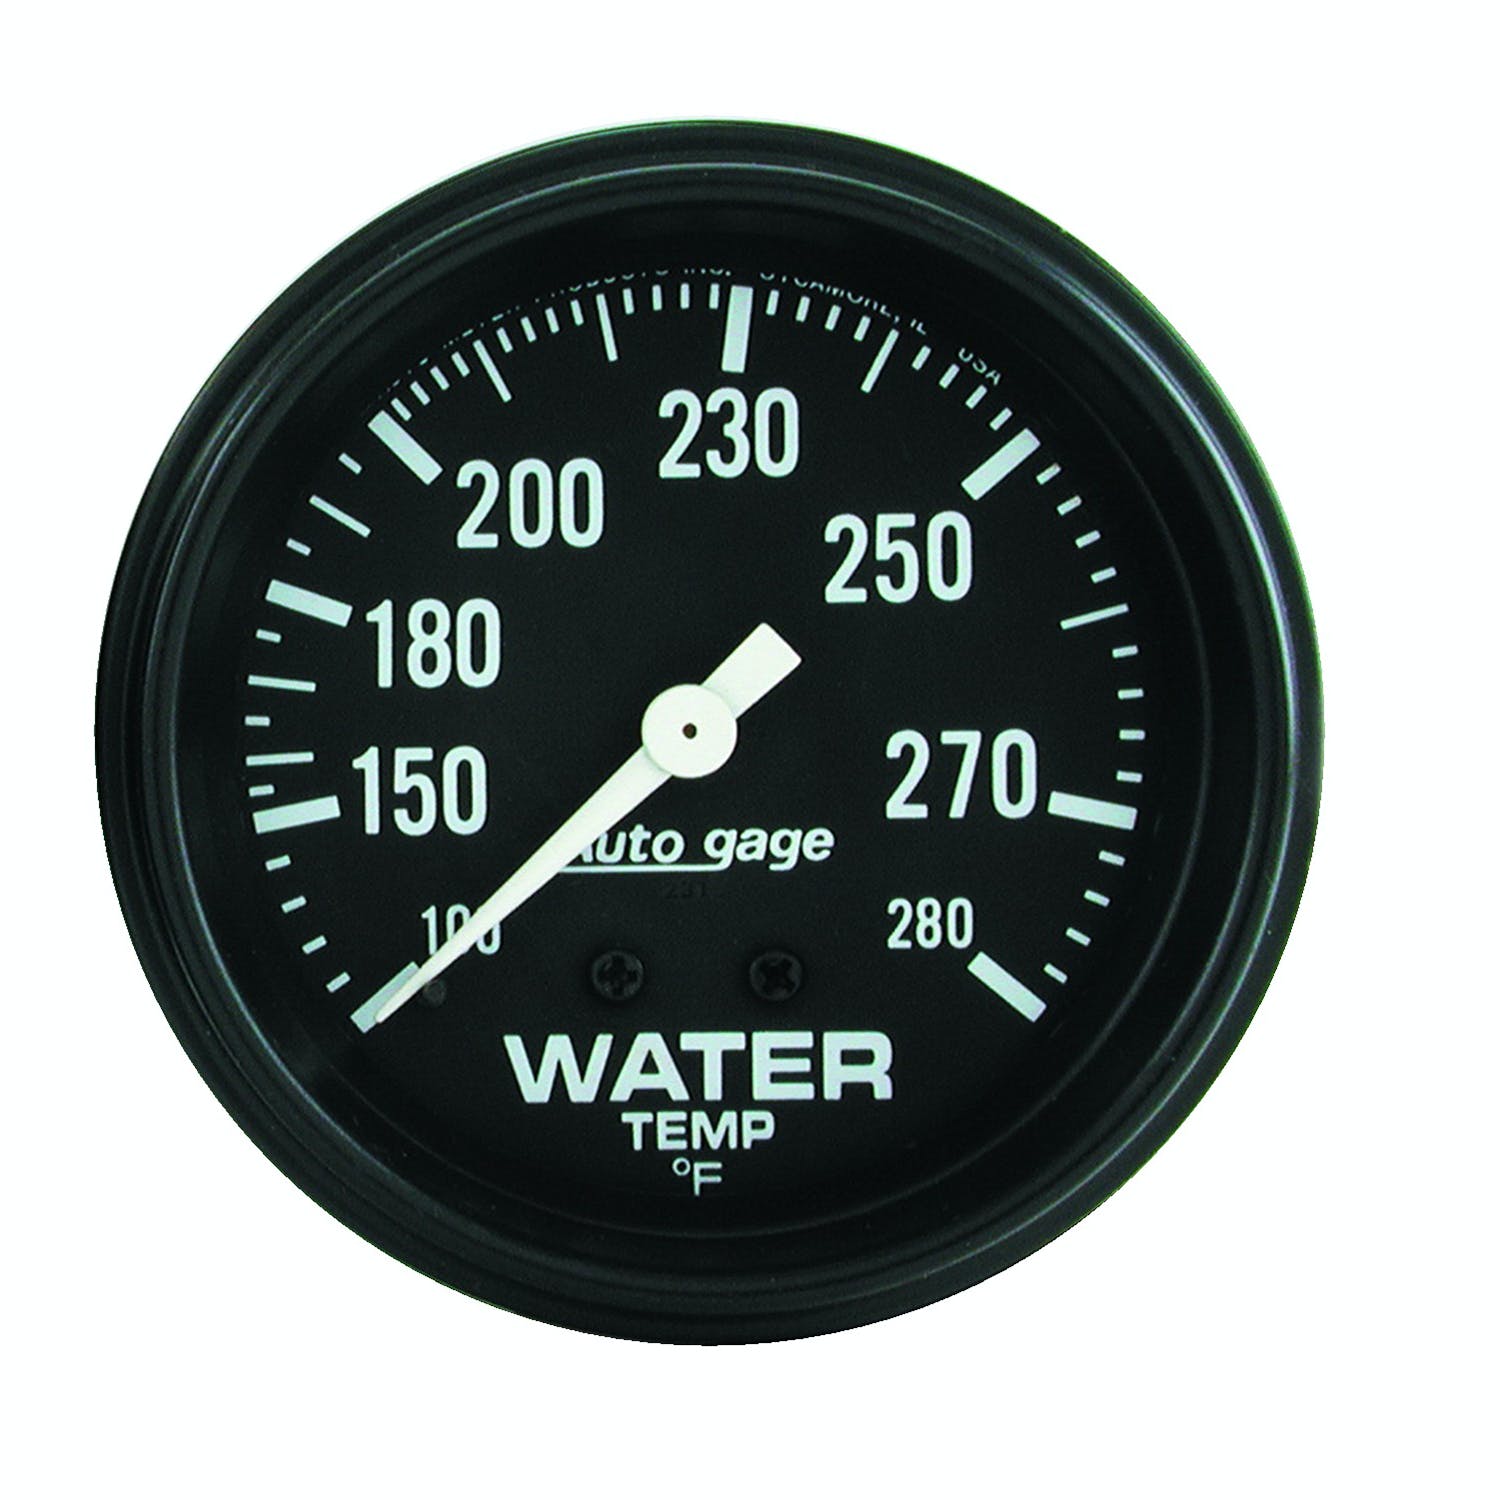 AutoMeter Products 2313 Water Temperature Gauge 100-280 F